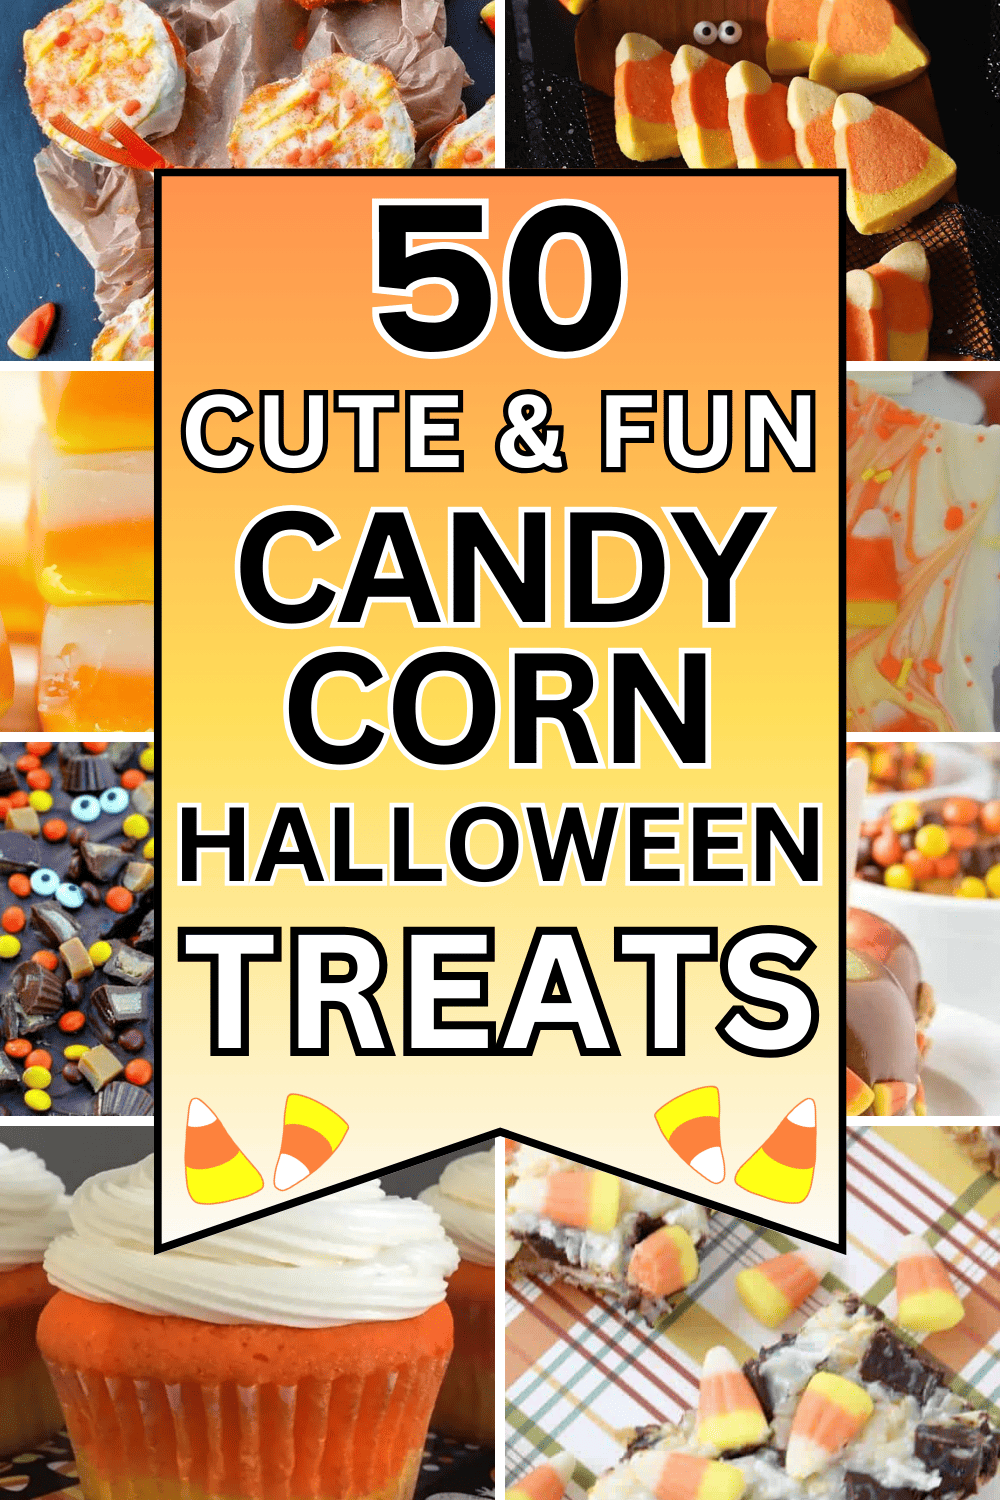 Cute candy corn dessert recipes & Halloween party food ideas! These cute desserts for halloween are candy corn desserts halloween treats, halloween food treats for school, halloween candy corn desserts, halloween food treats easy, halloween food treats kids, halloween food treats desserts, halloween theme dessert ideas, cute halloween themed desserts, halloween food for party desserts fun, spooky halloween desserts for parties, halloween desserts easy parties food, Halloween cupcakes candy corn.